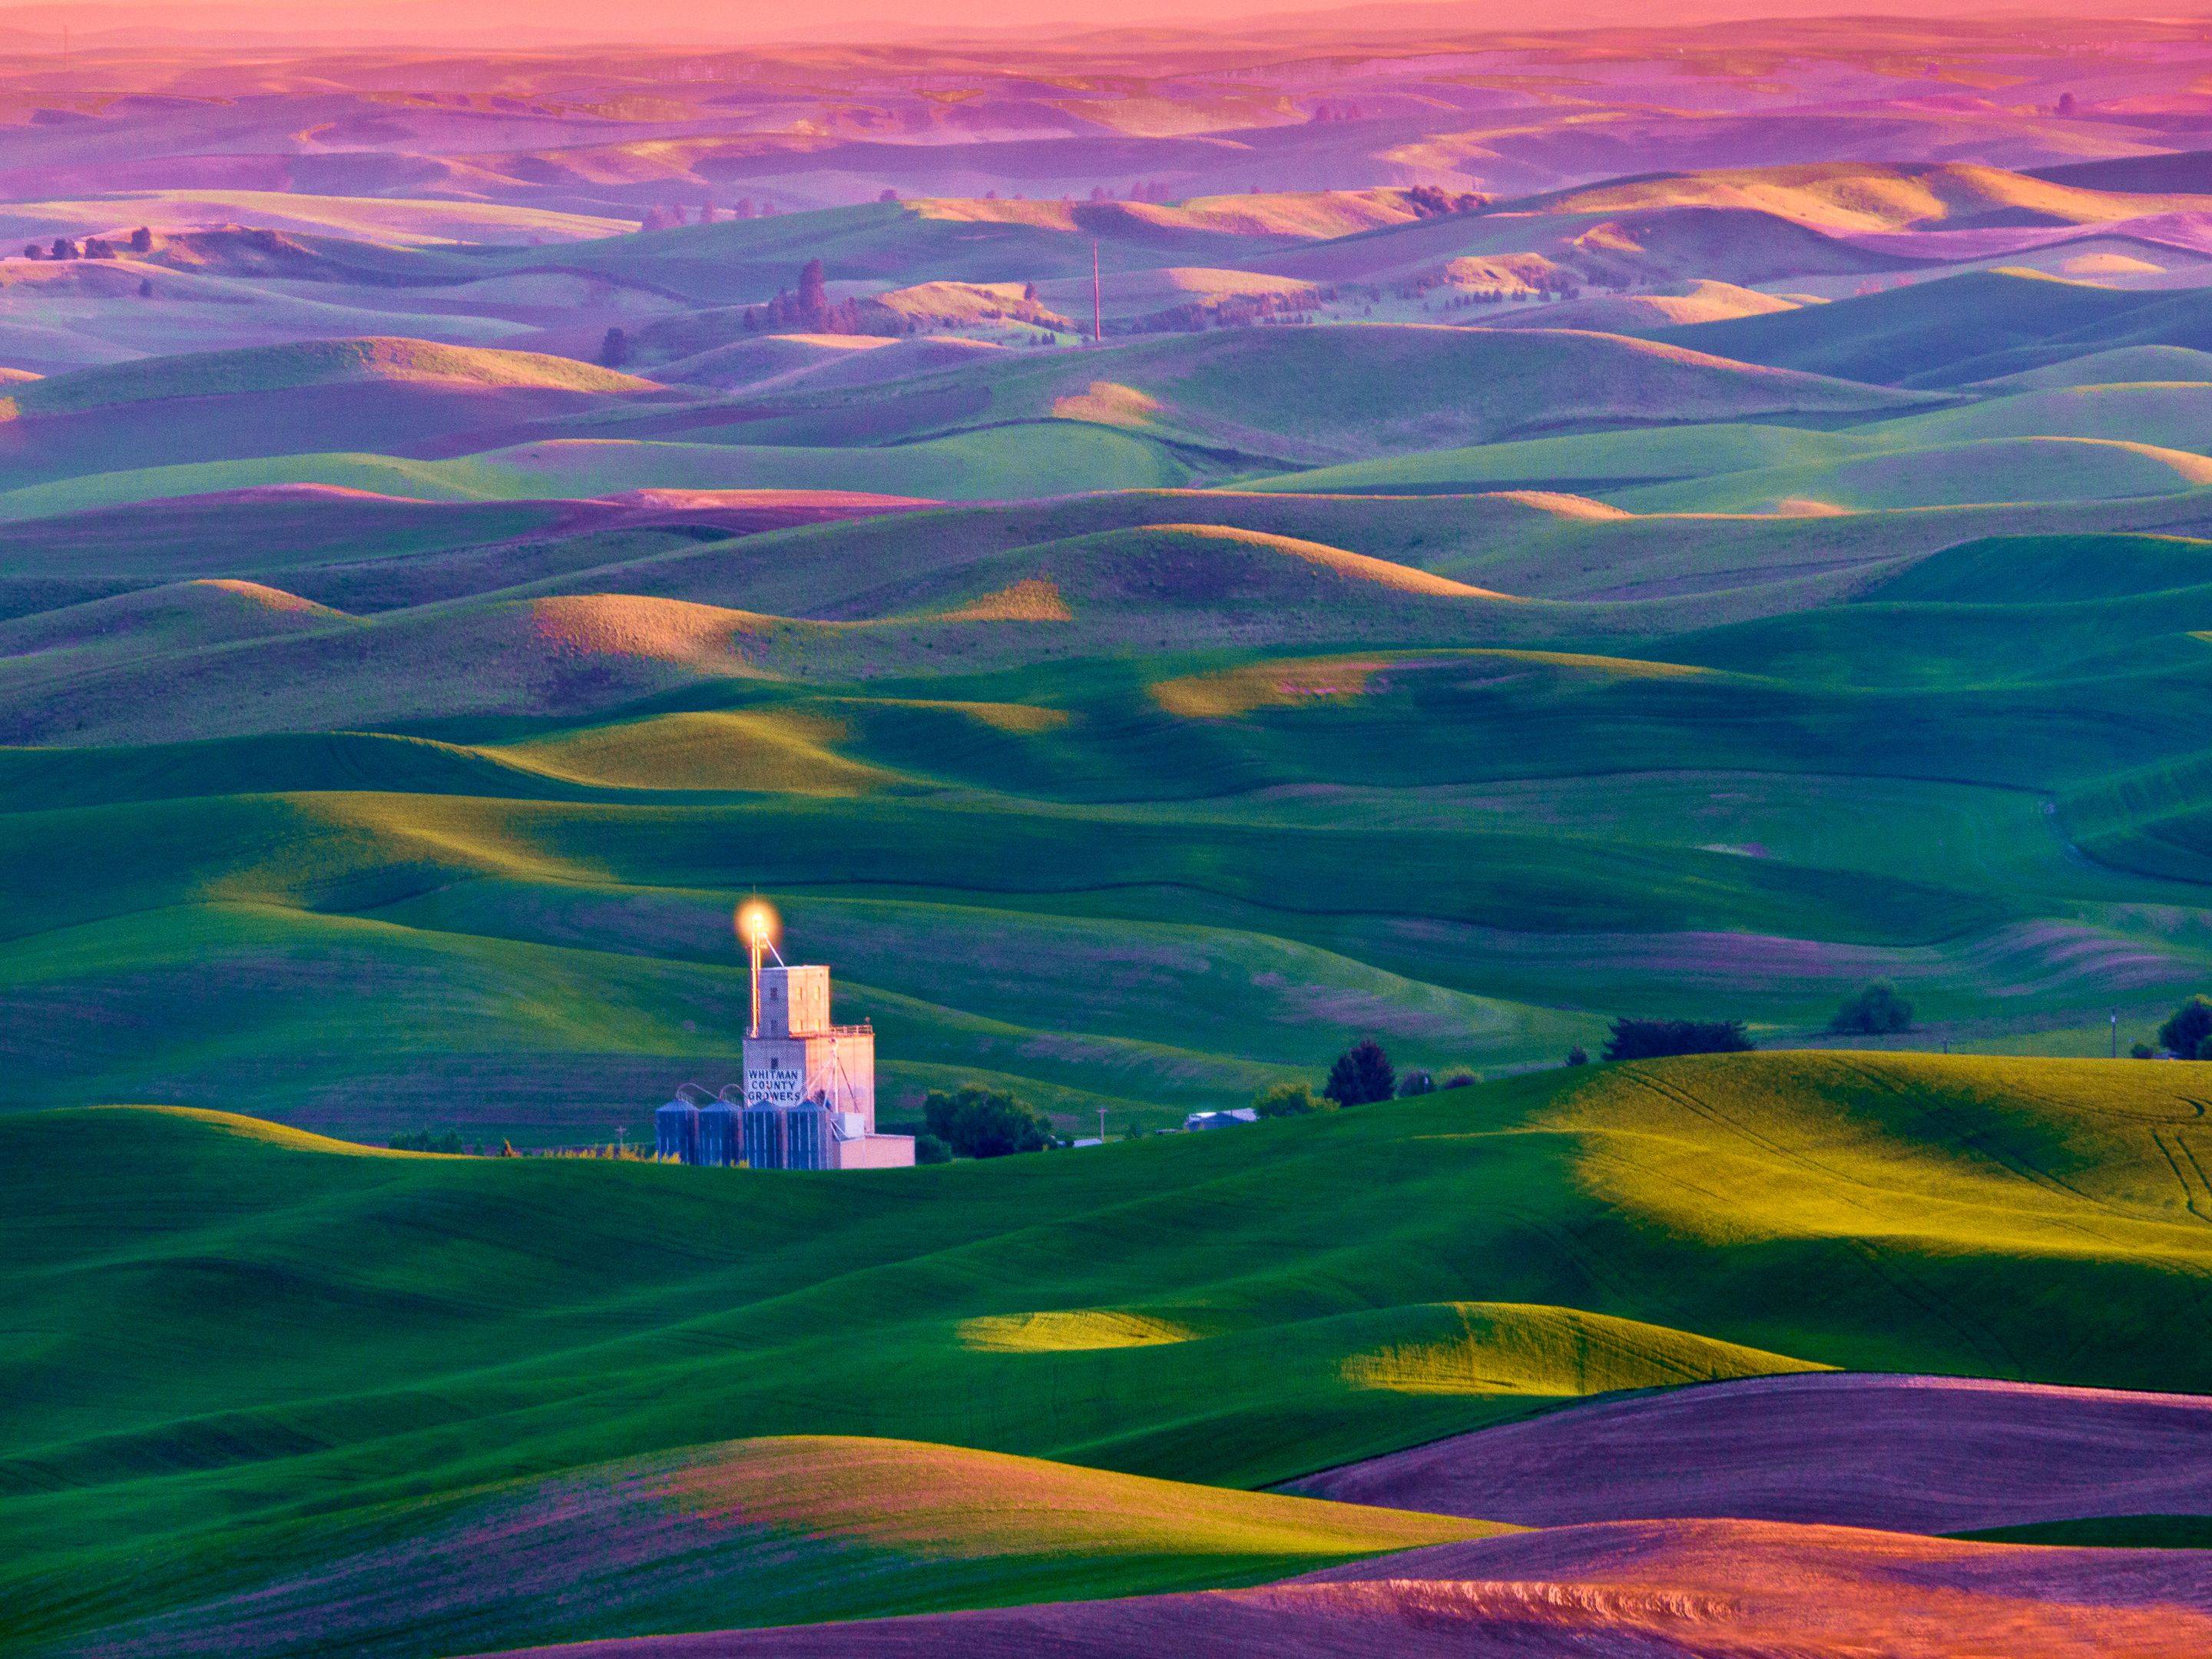 The colorful, rolling hills of Tuscany